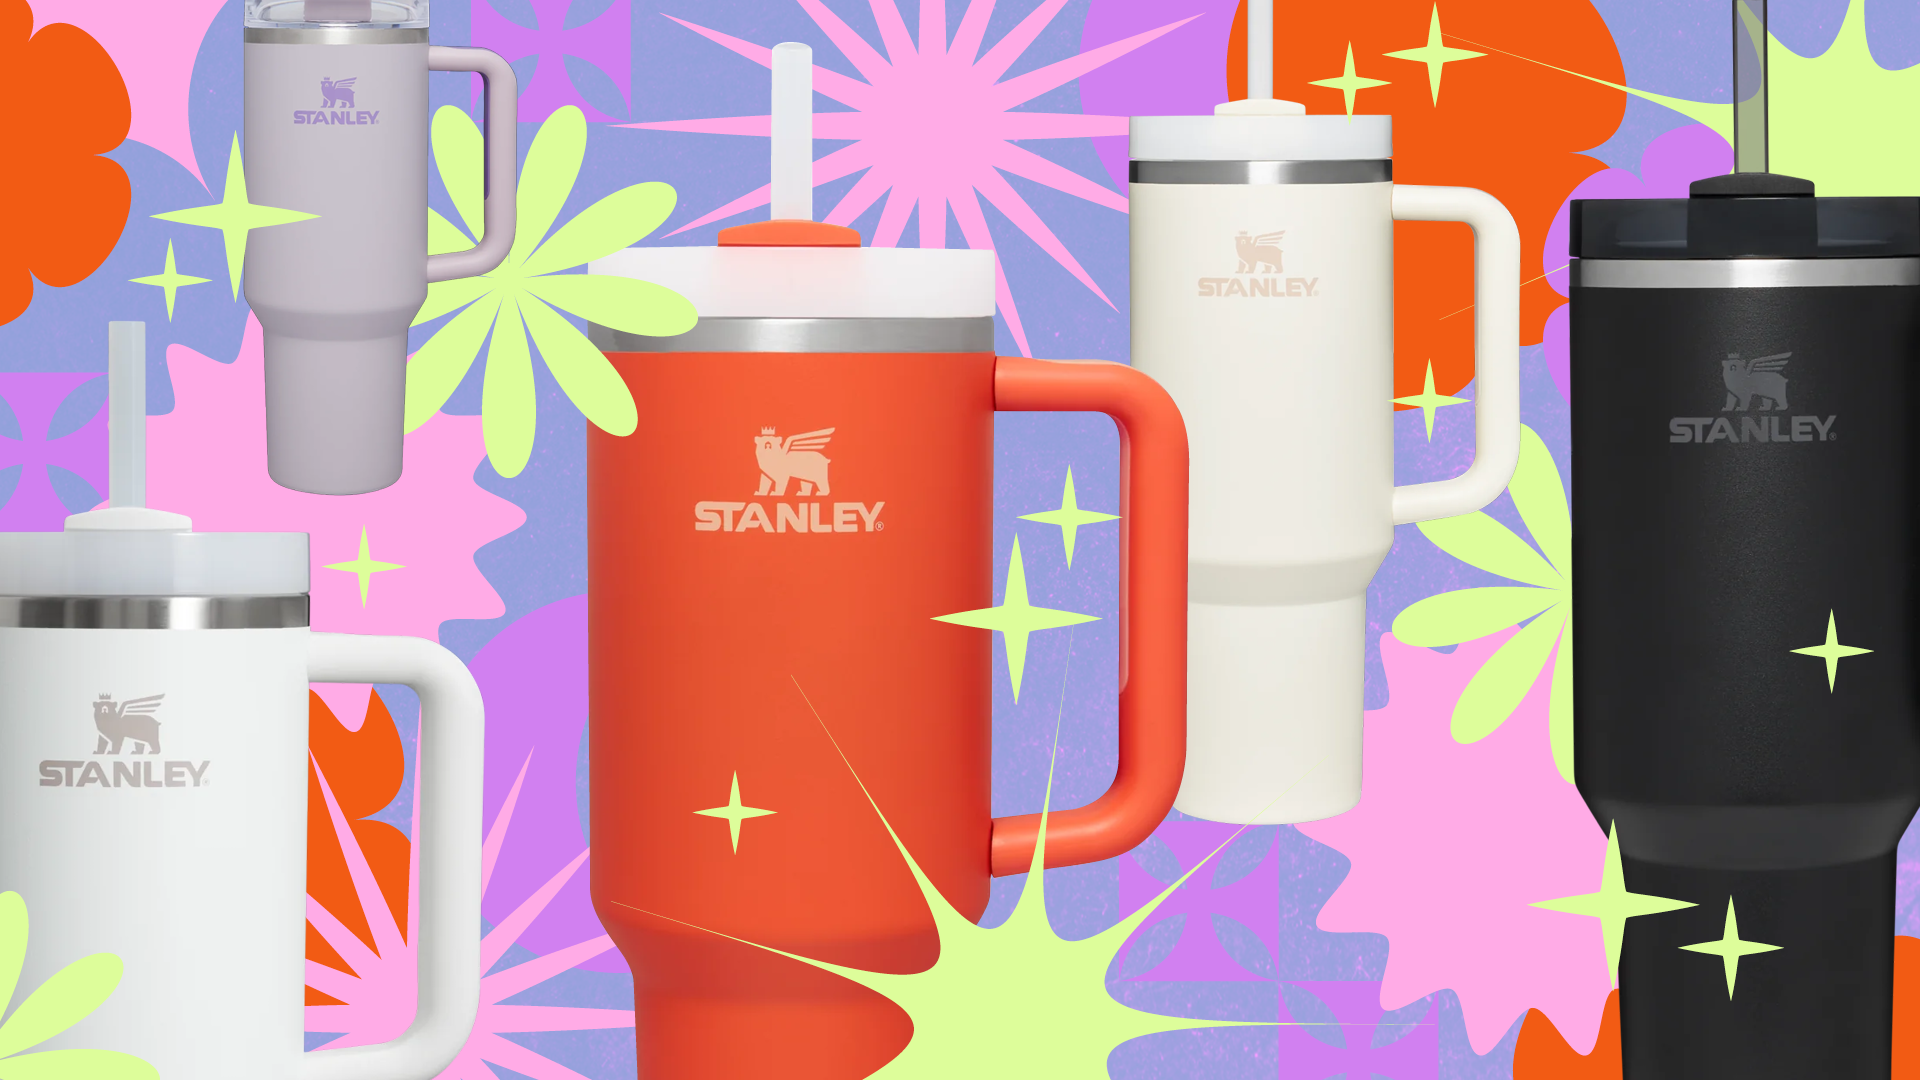 Five Stanley-branded 40-ounce tumblers surrounded by illustrated starbursts and flower shapes.